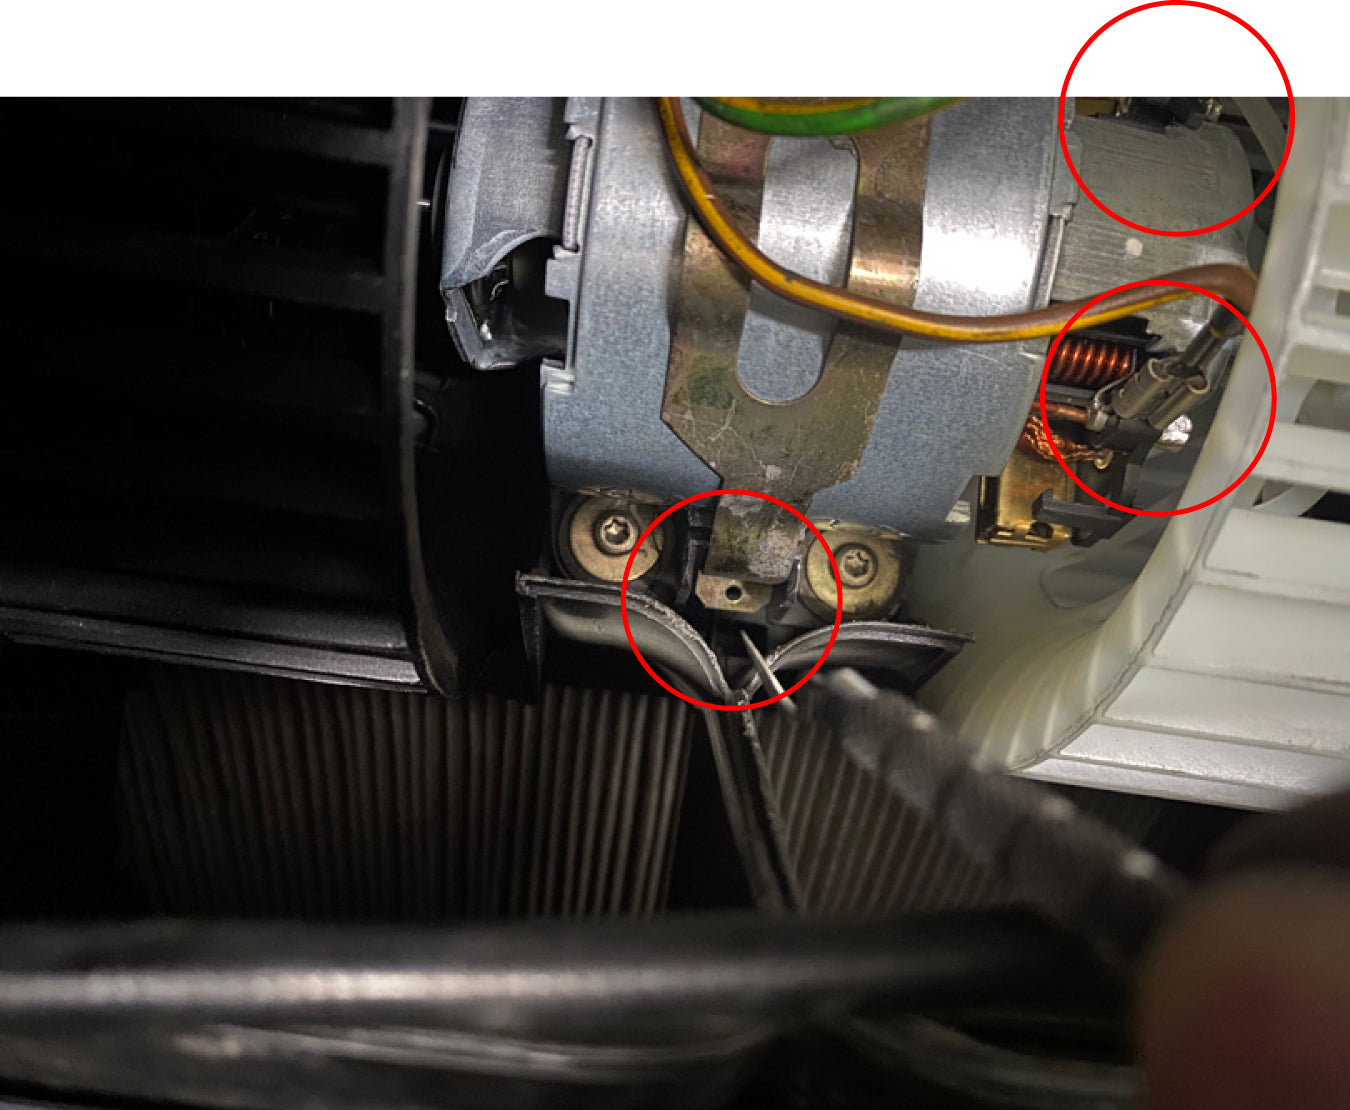 BMW E36 HVAC fan motor with wiring connectors circled.